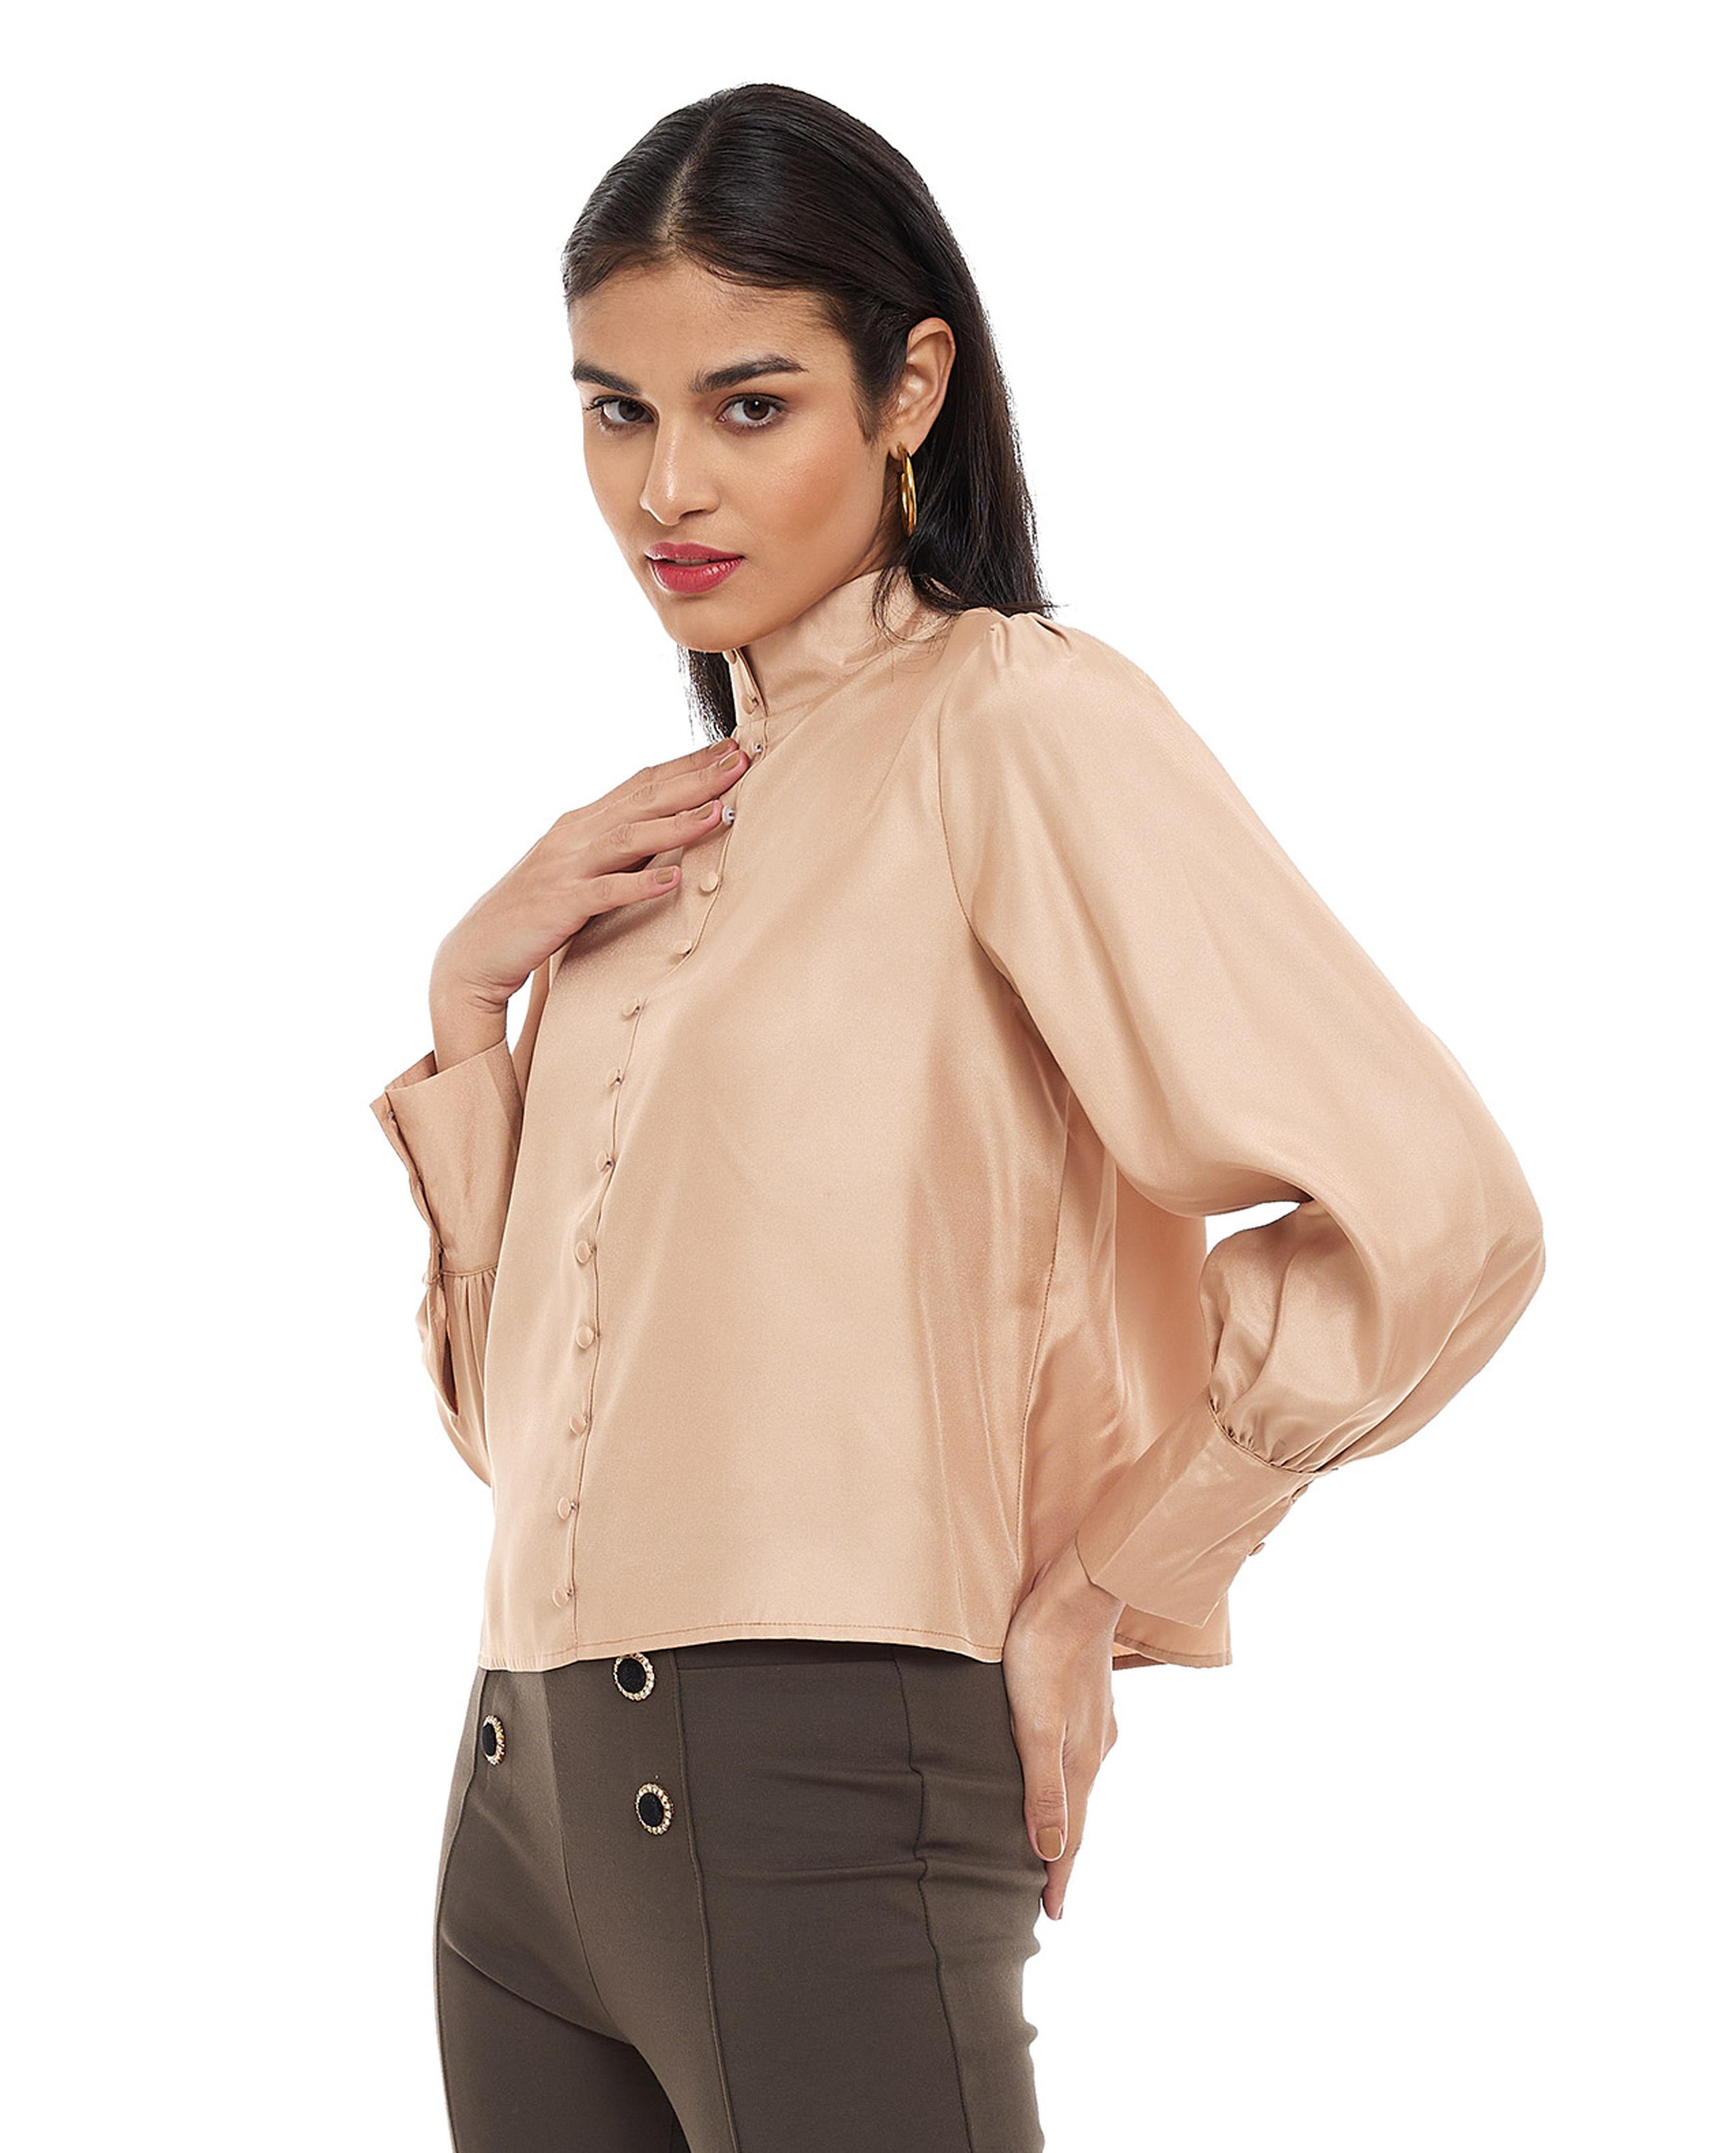 Solid Top with High Neck and Bishop Sleeves